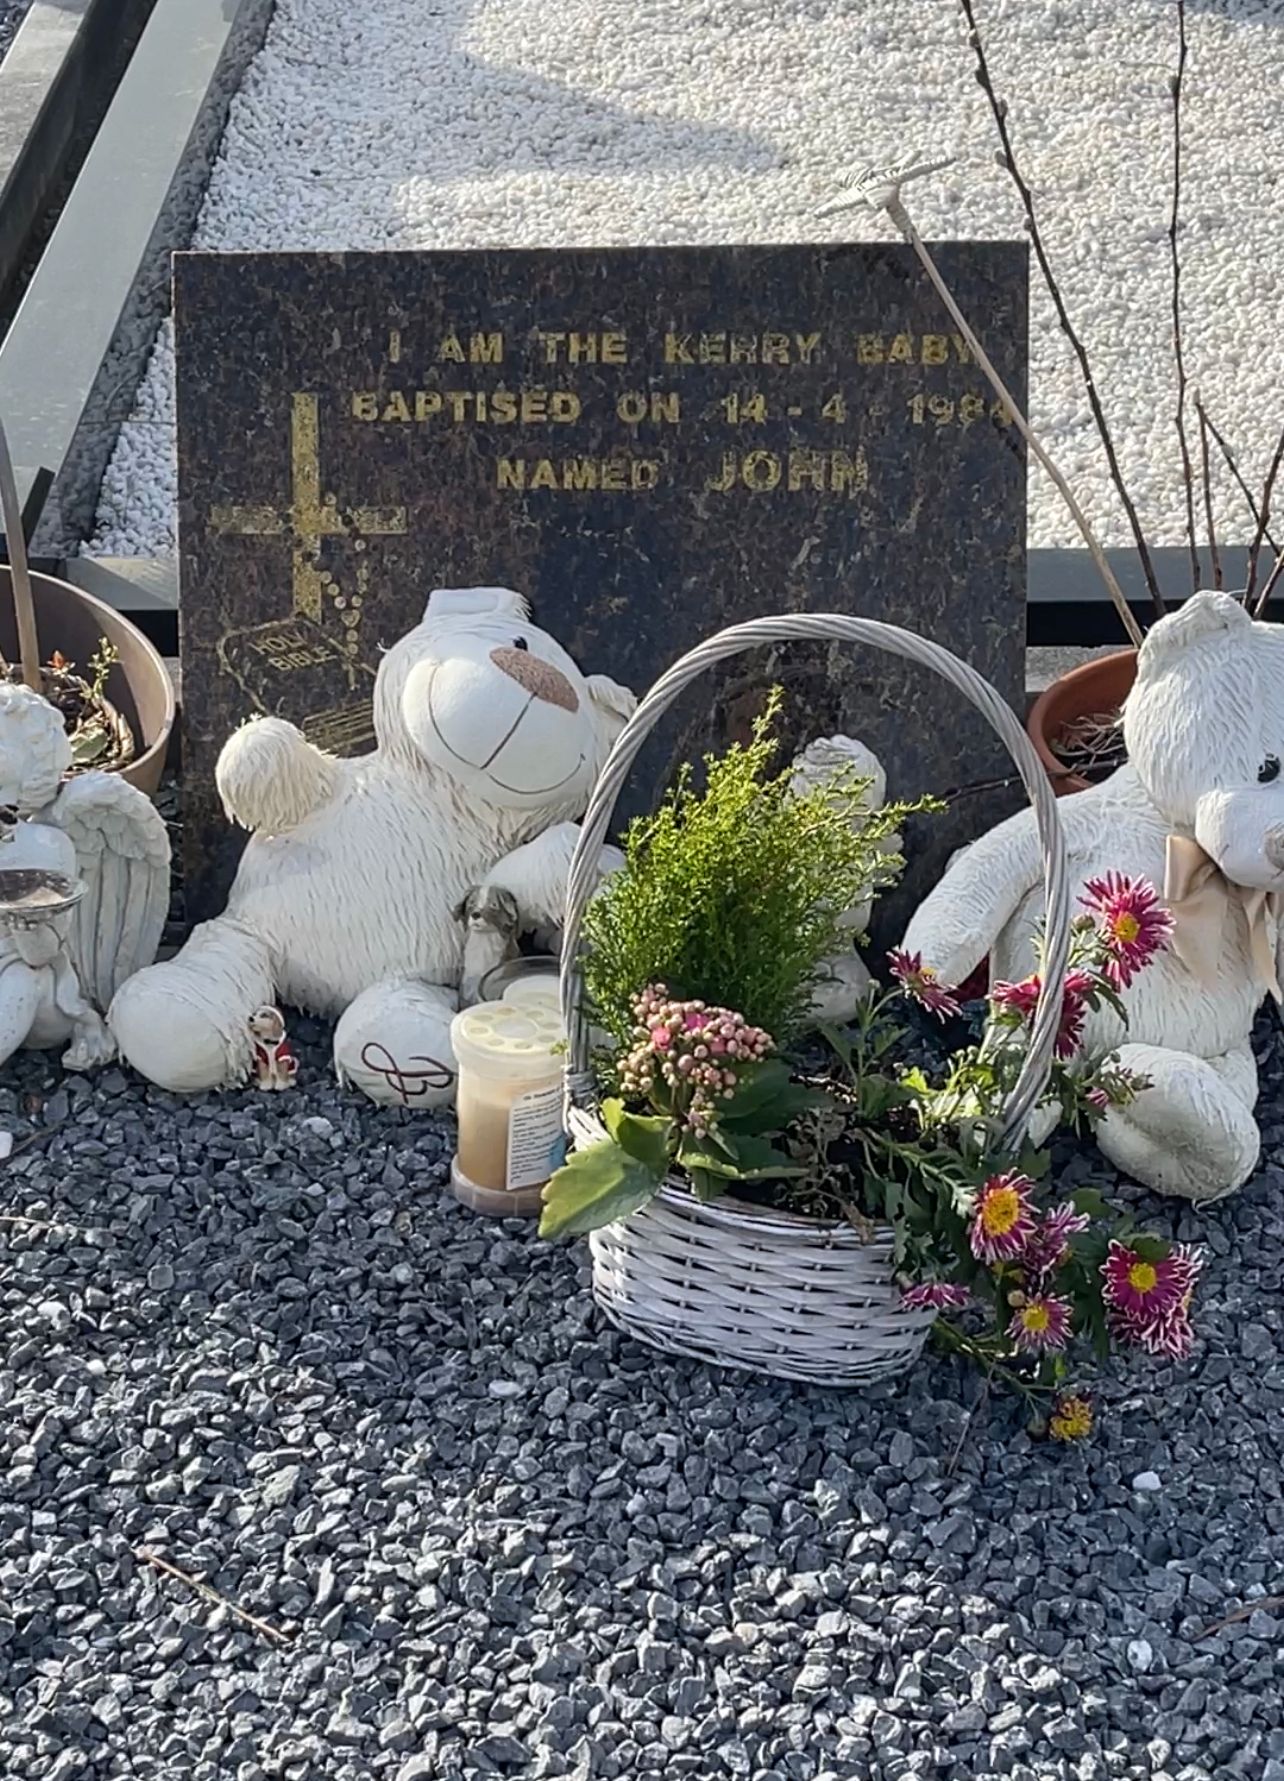 The grave of Baby John in Co Kerry where there are flowers and toys laid for him.